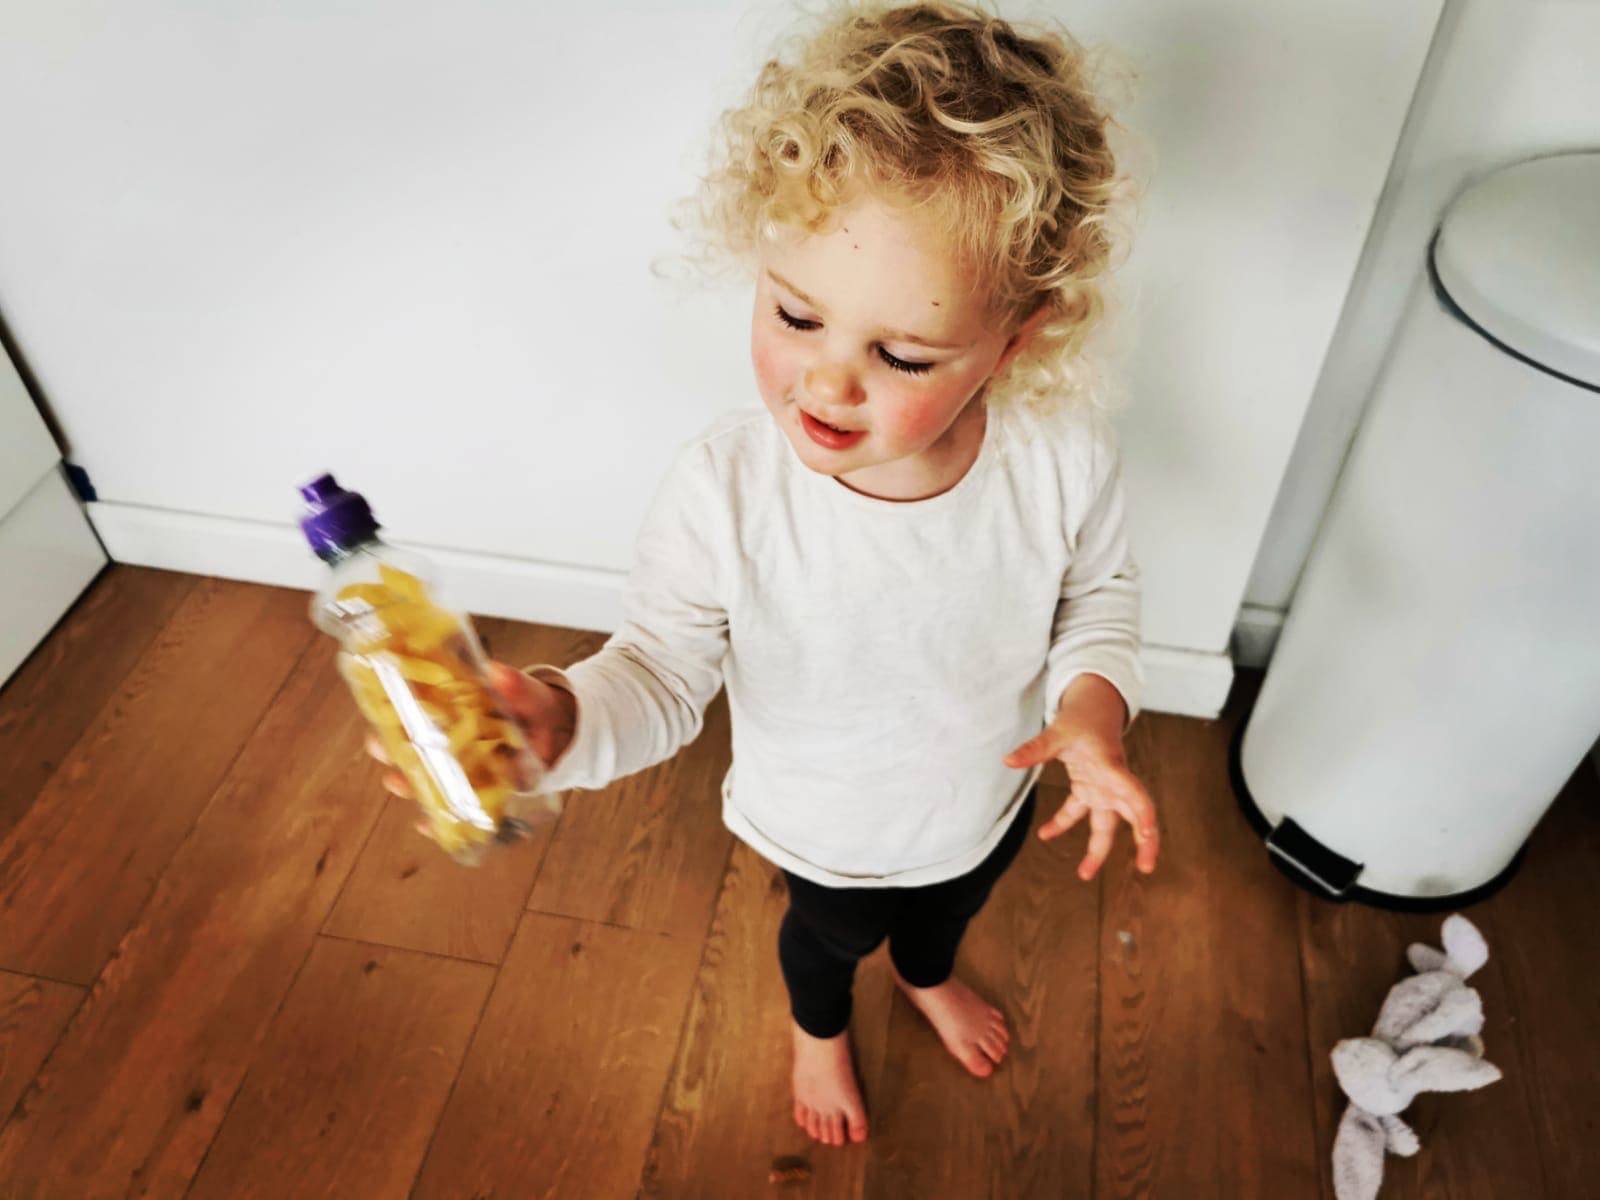 Image of a toddler smiling and holding a bottle.